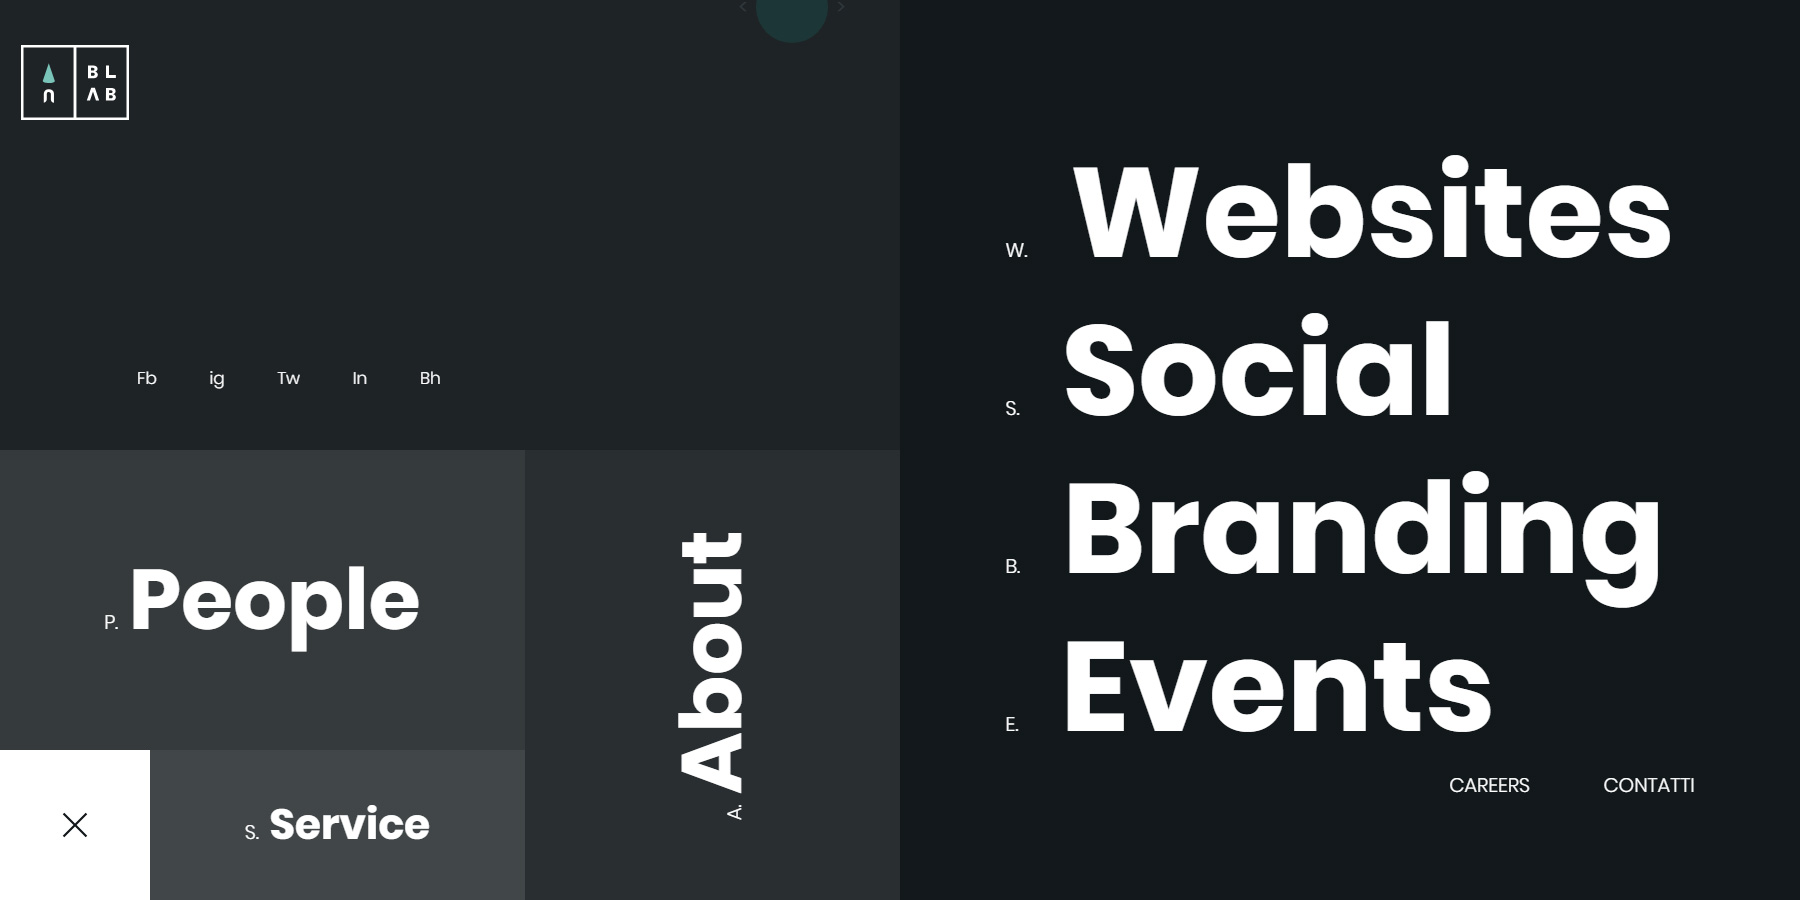 Blab - Website of the Day